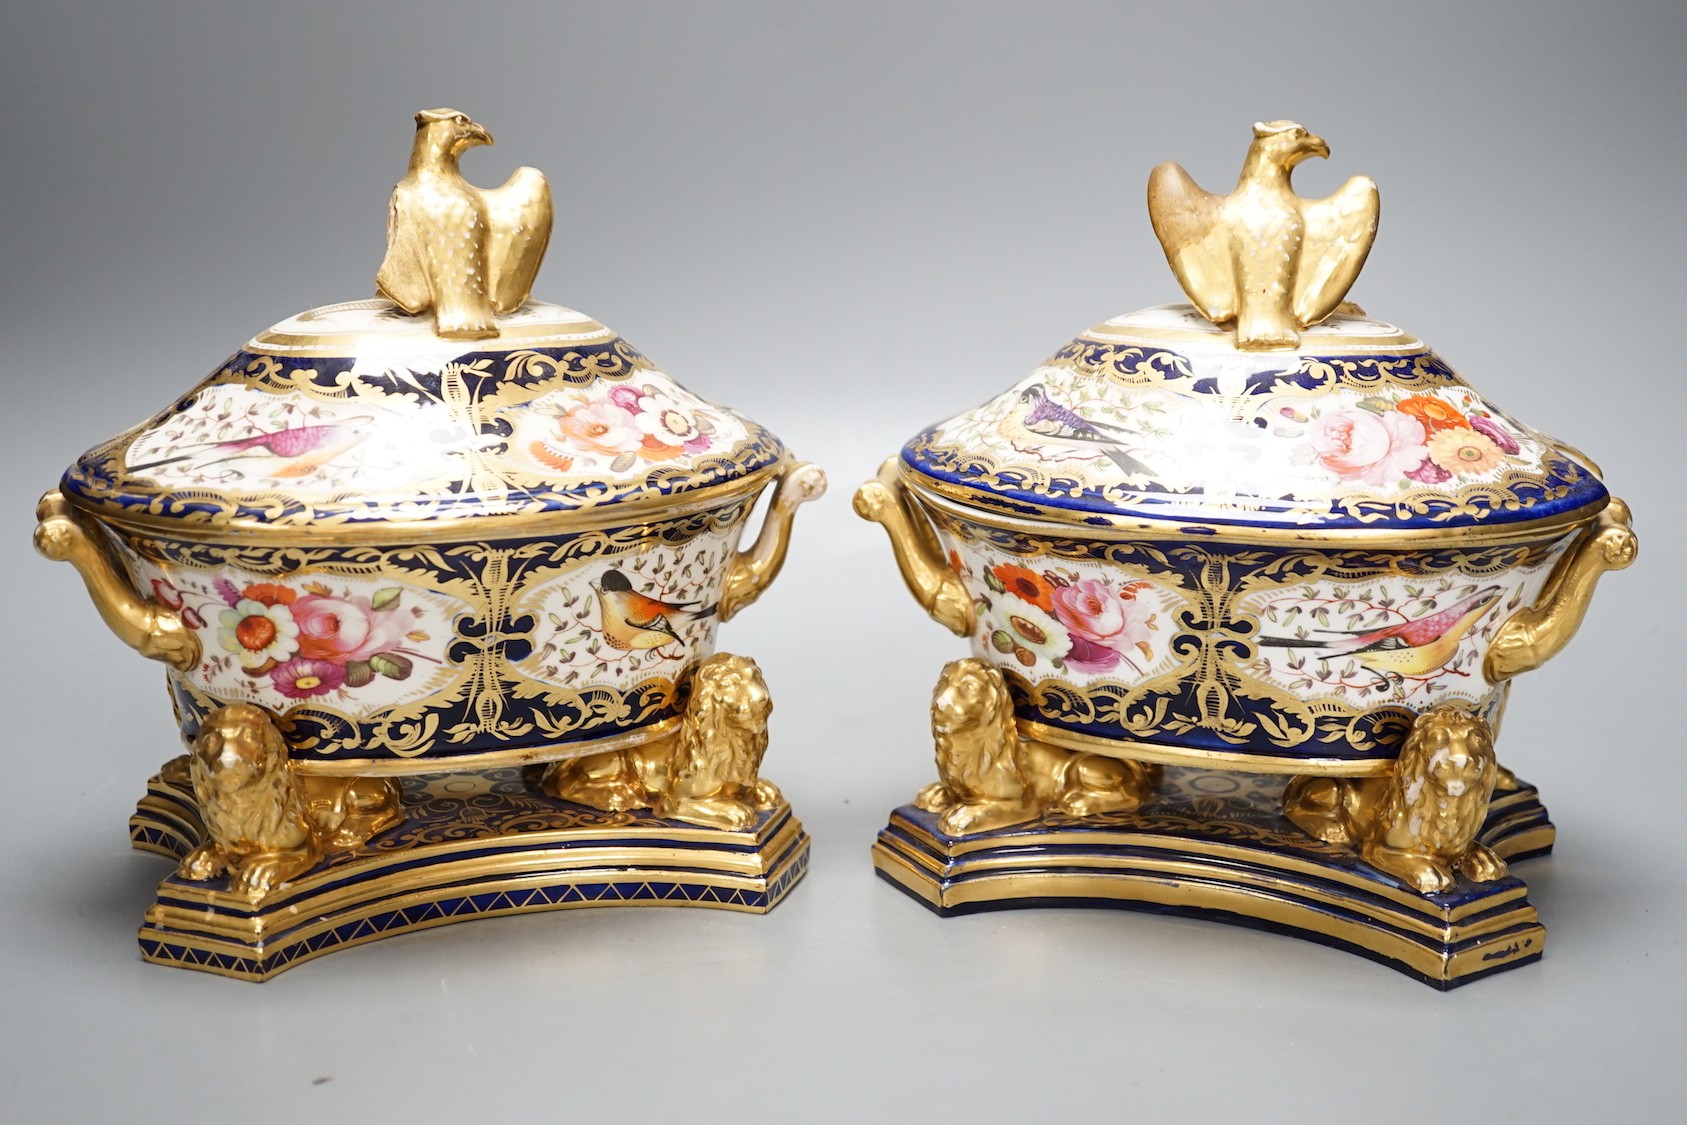 A pair of unusual English porcelain Imari sauce tureens, covers and stands, possibly Coalport c.1820, 19cm tall